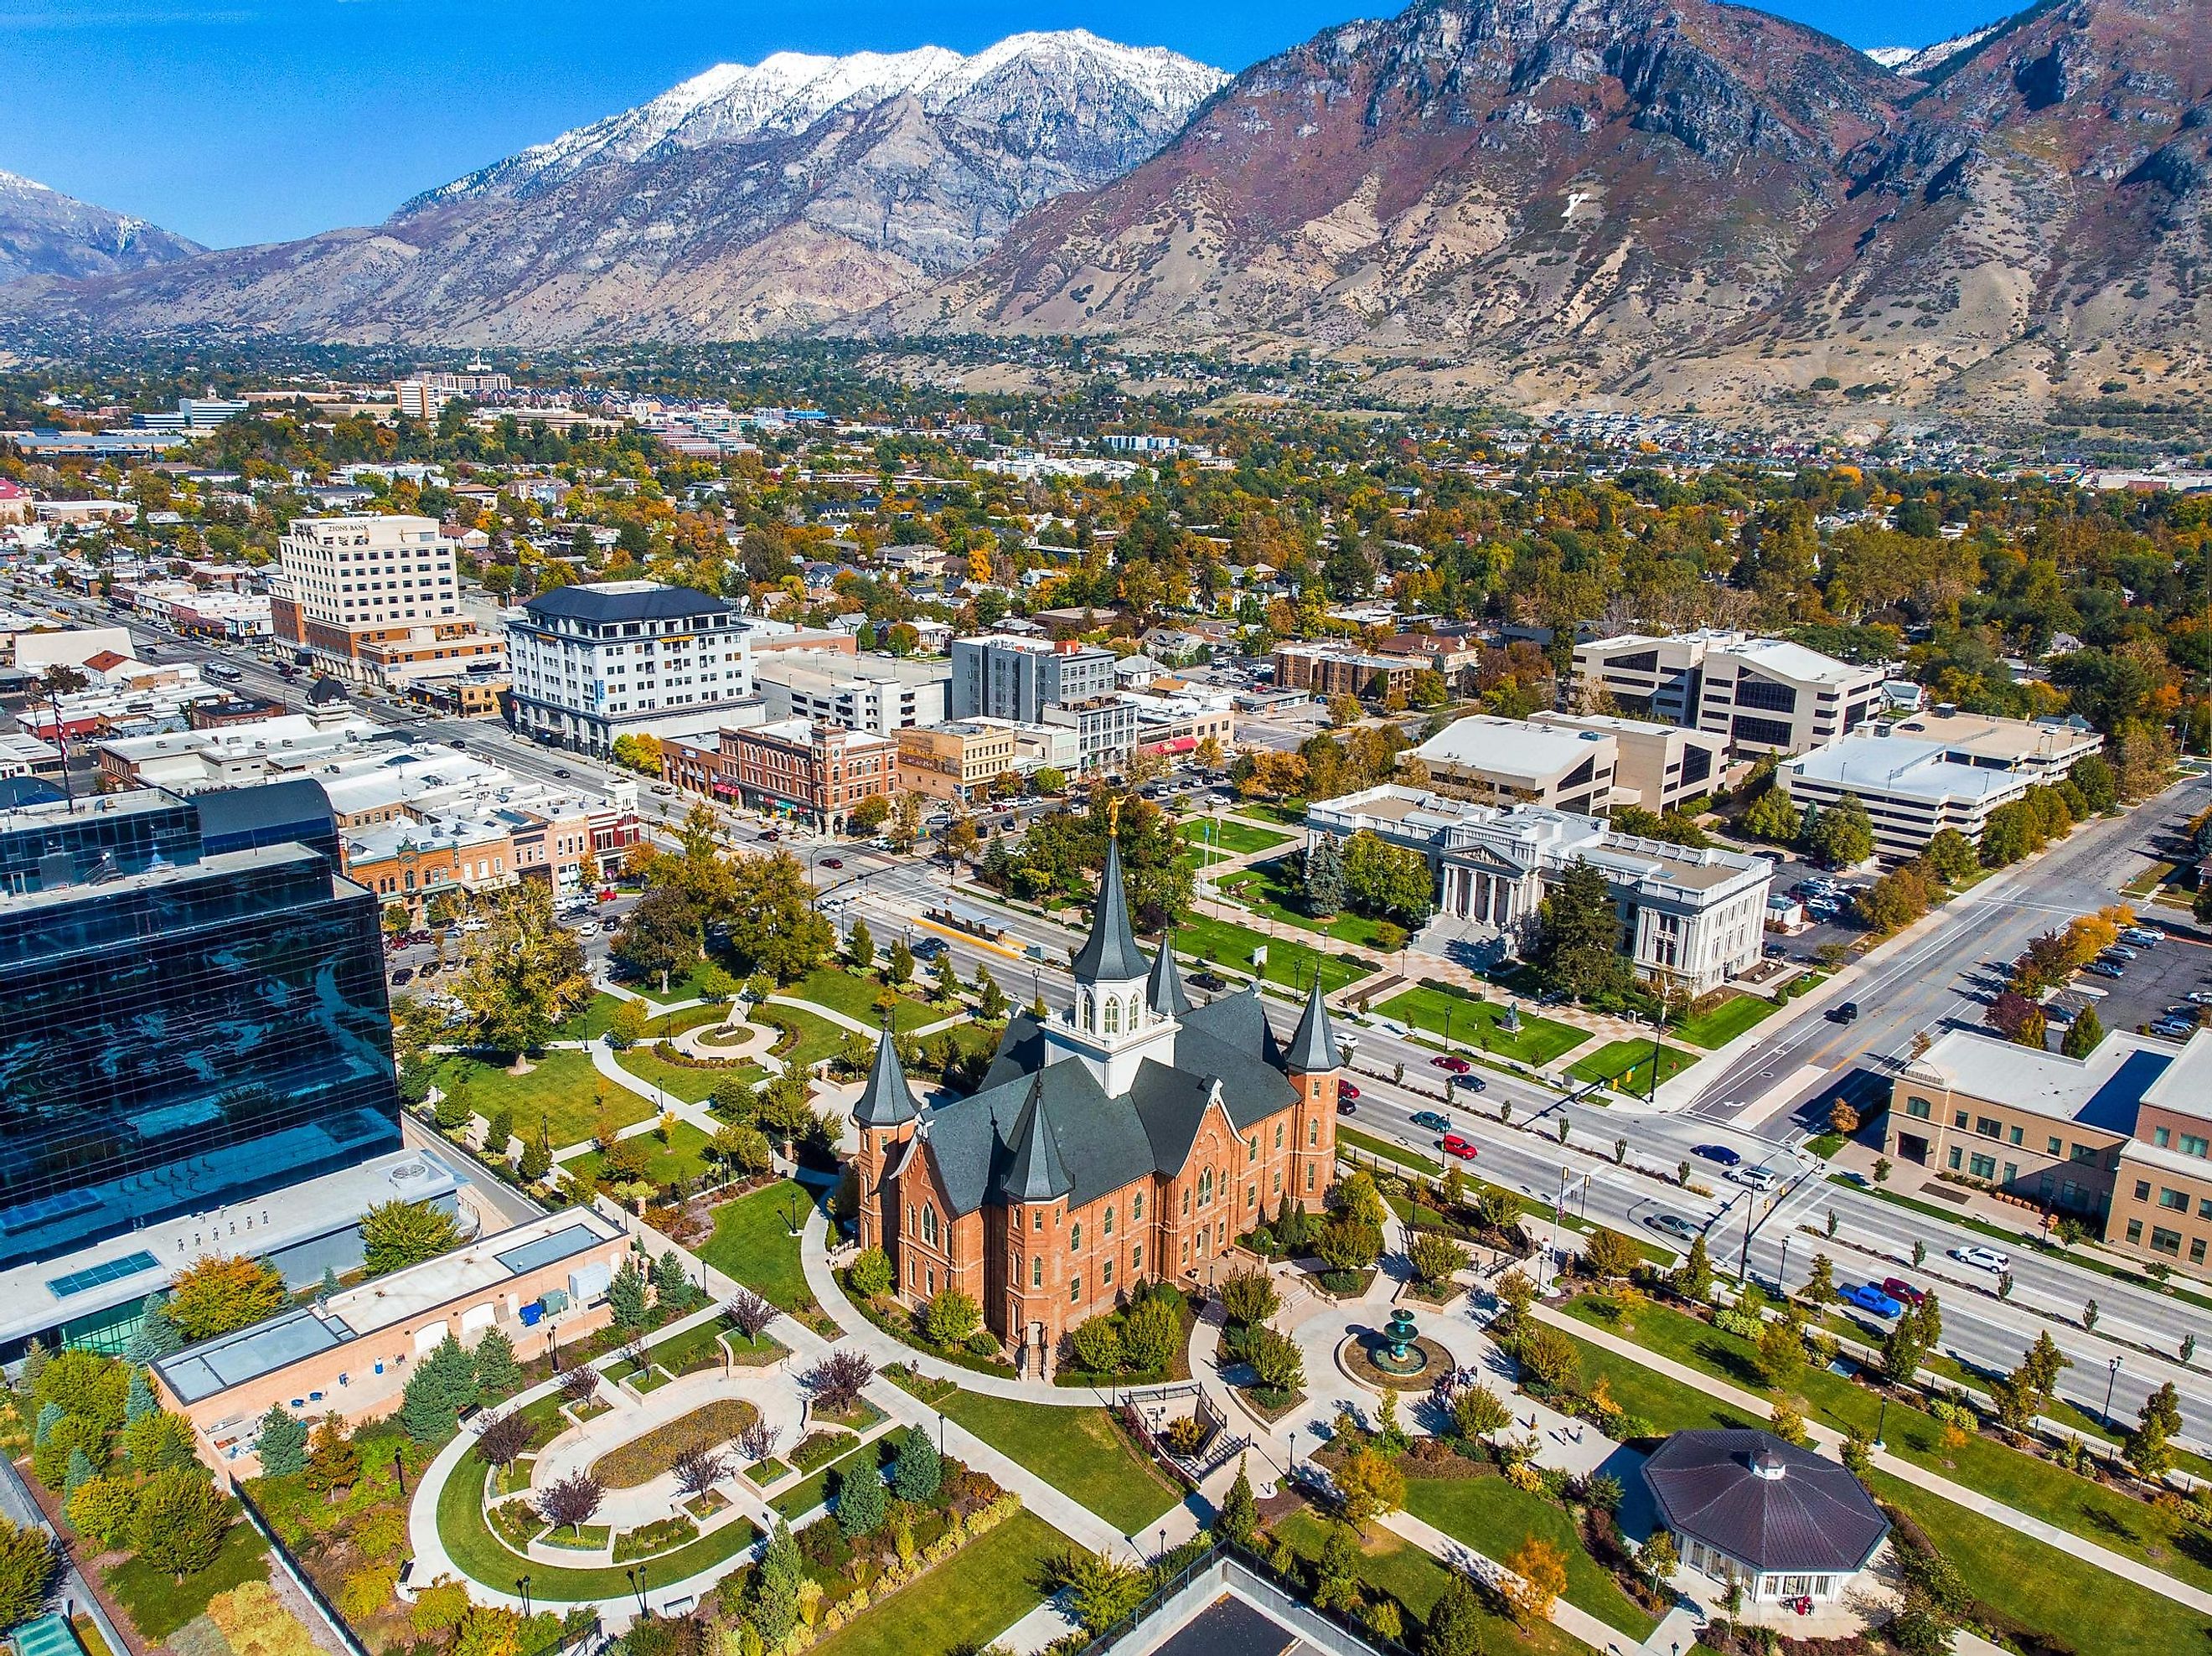 An aerial view of downtown provo Utah